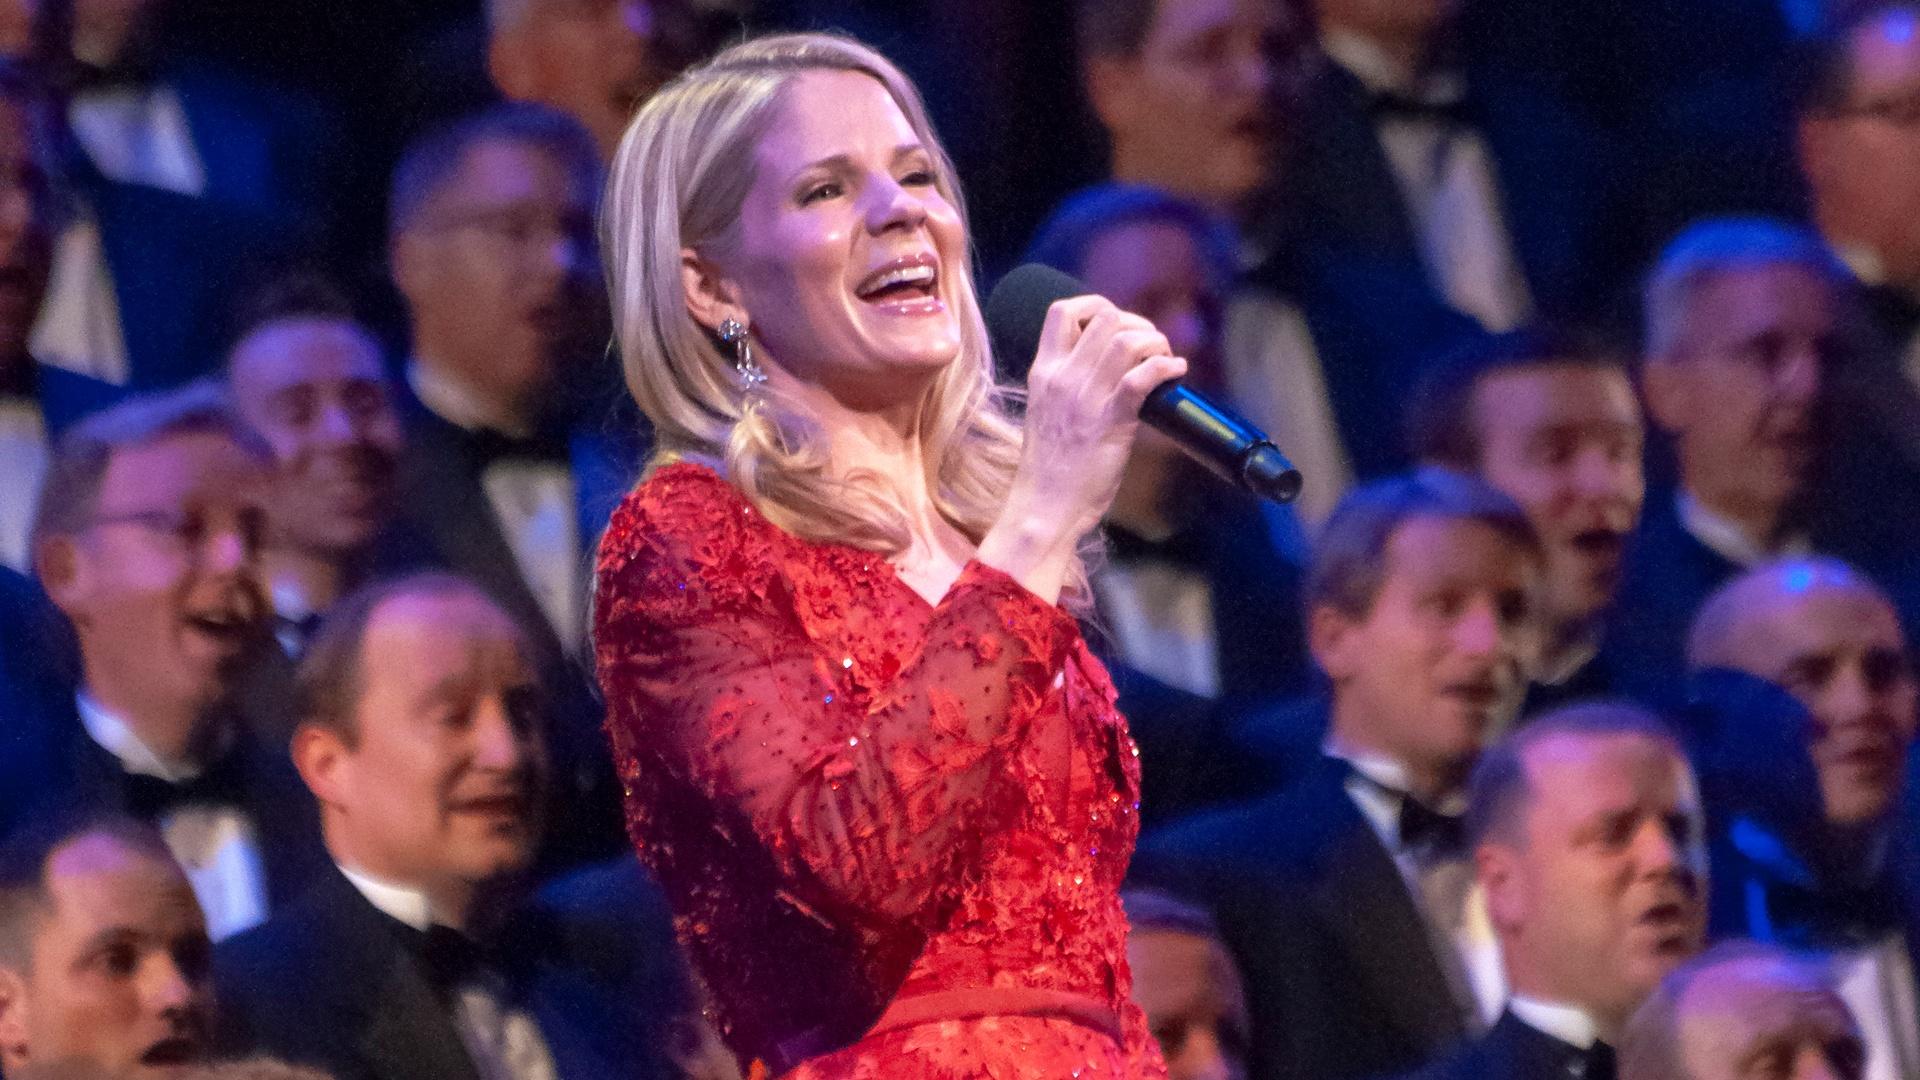 Kelli O'Hara in a red dress sings into a microphone with the choir behind her